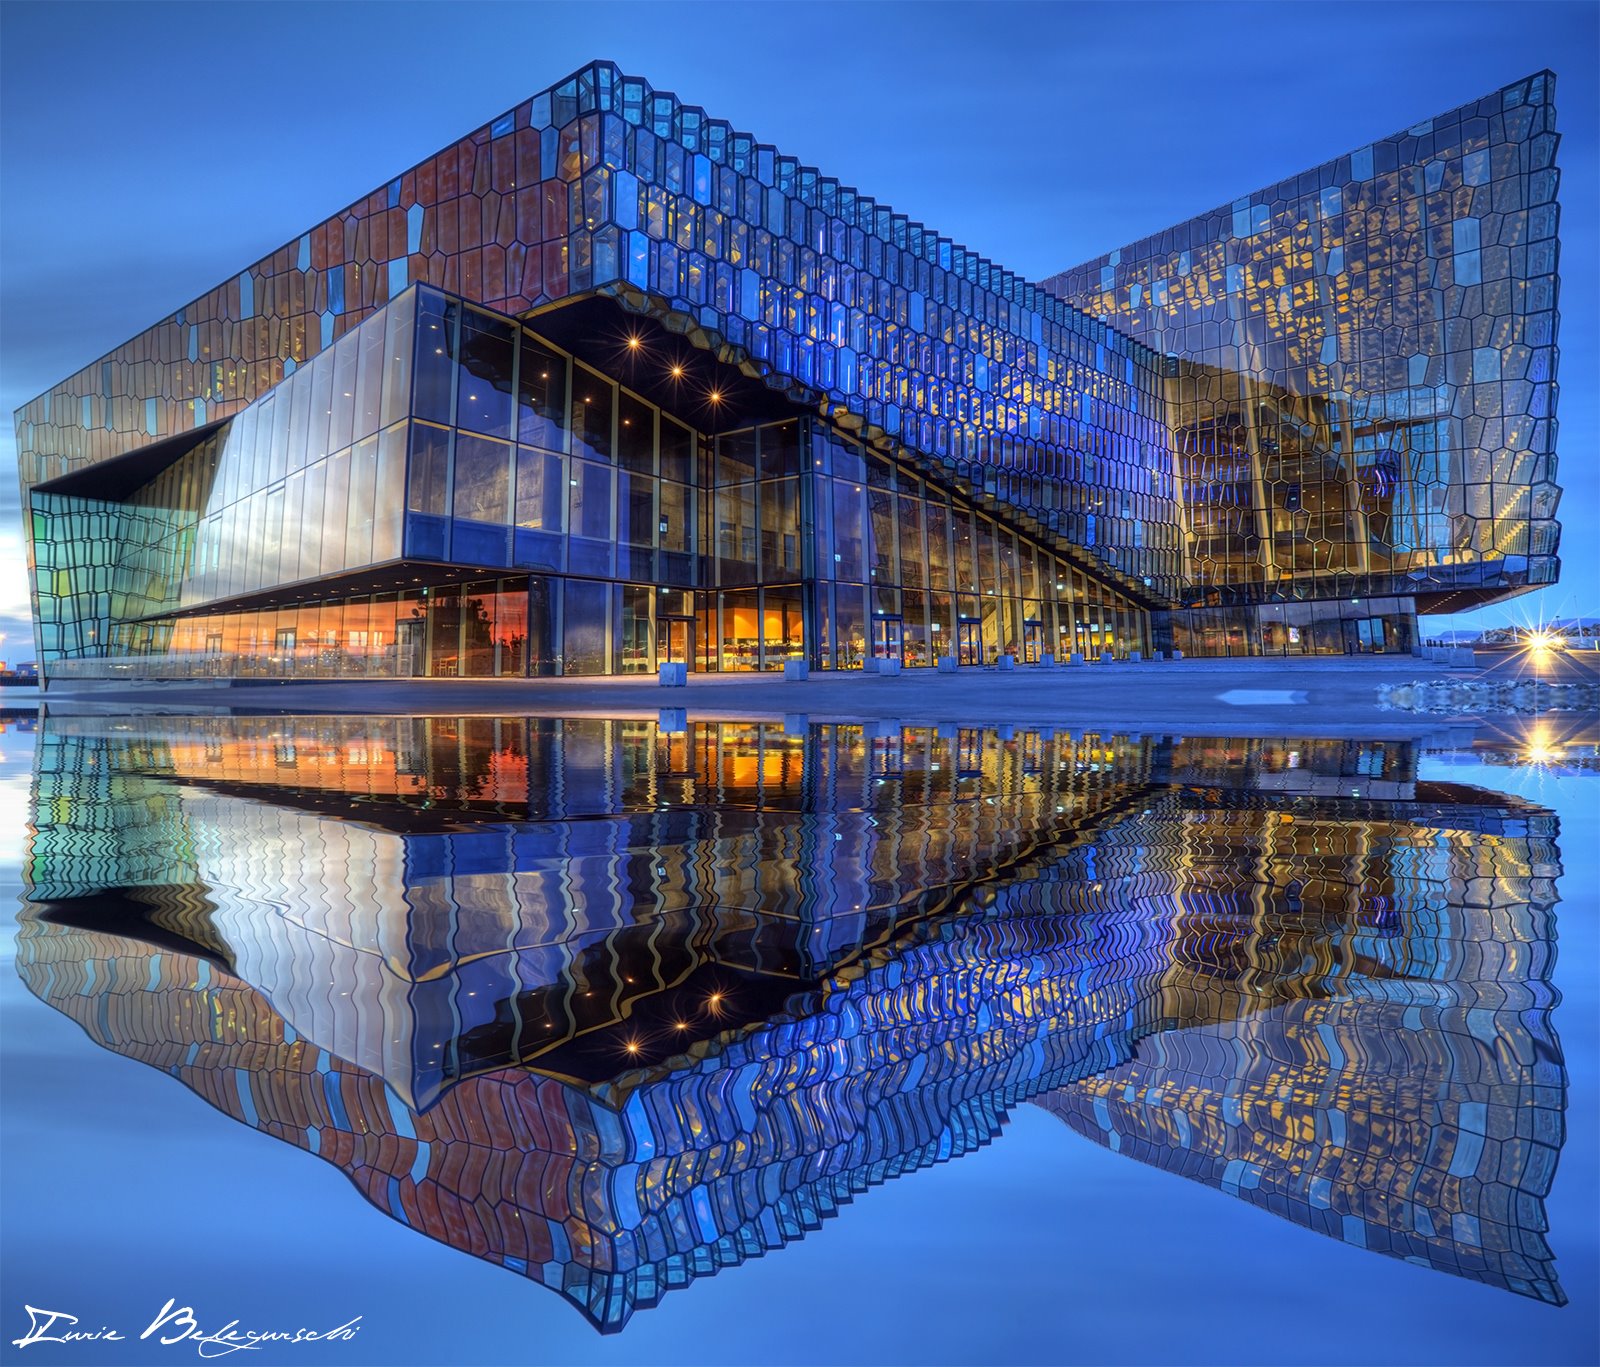 Harpa Reykjavík's Concert and Conference Hall Guide to Iceland